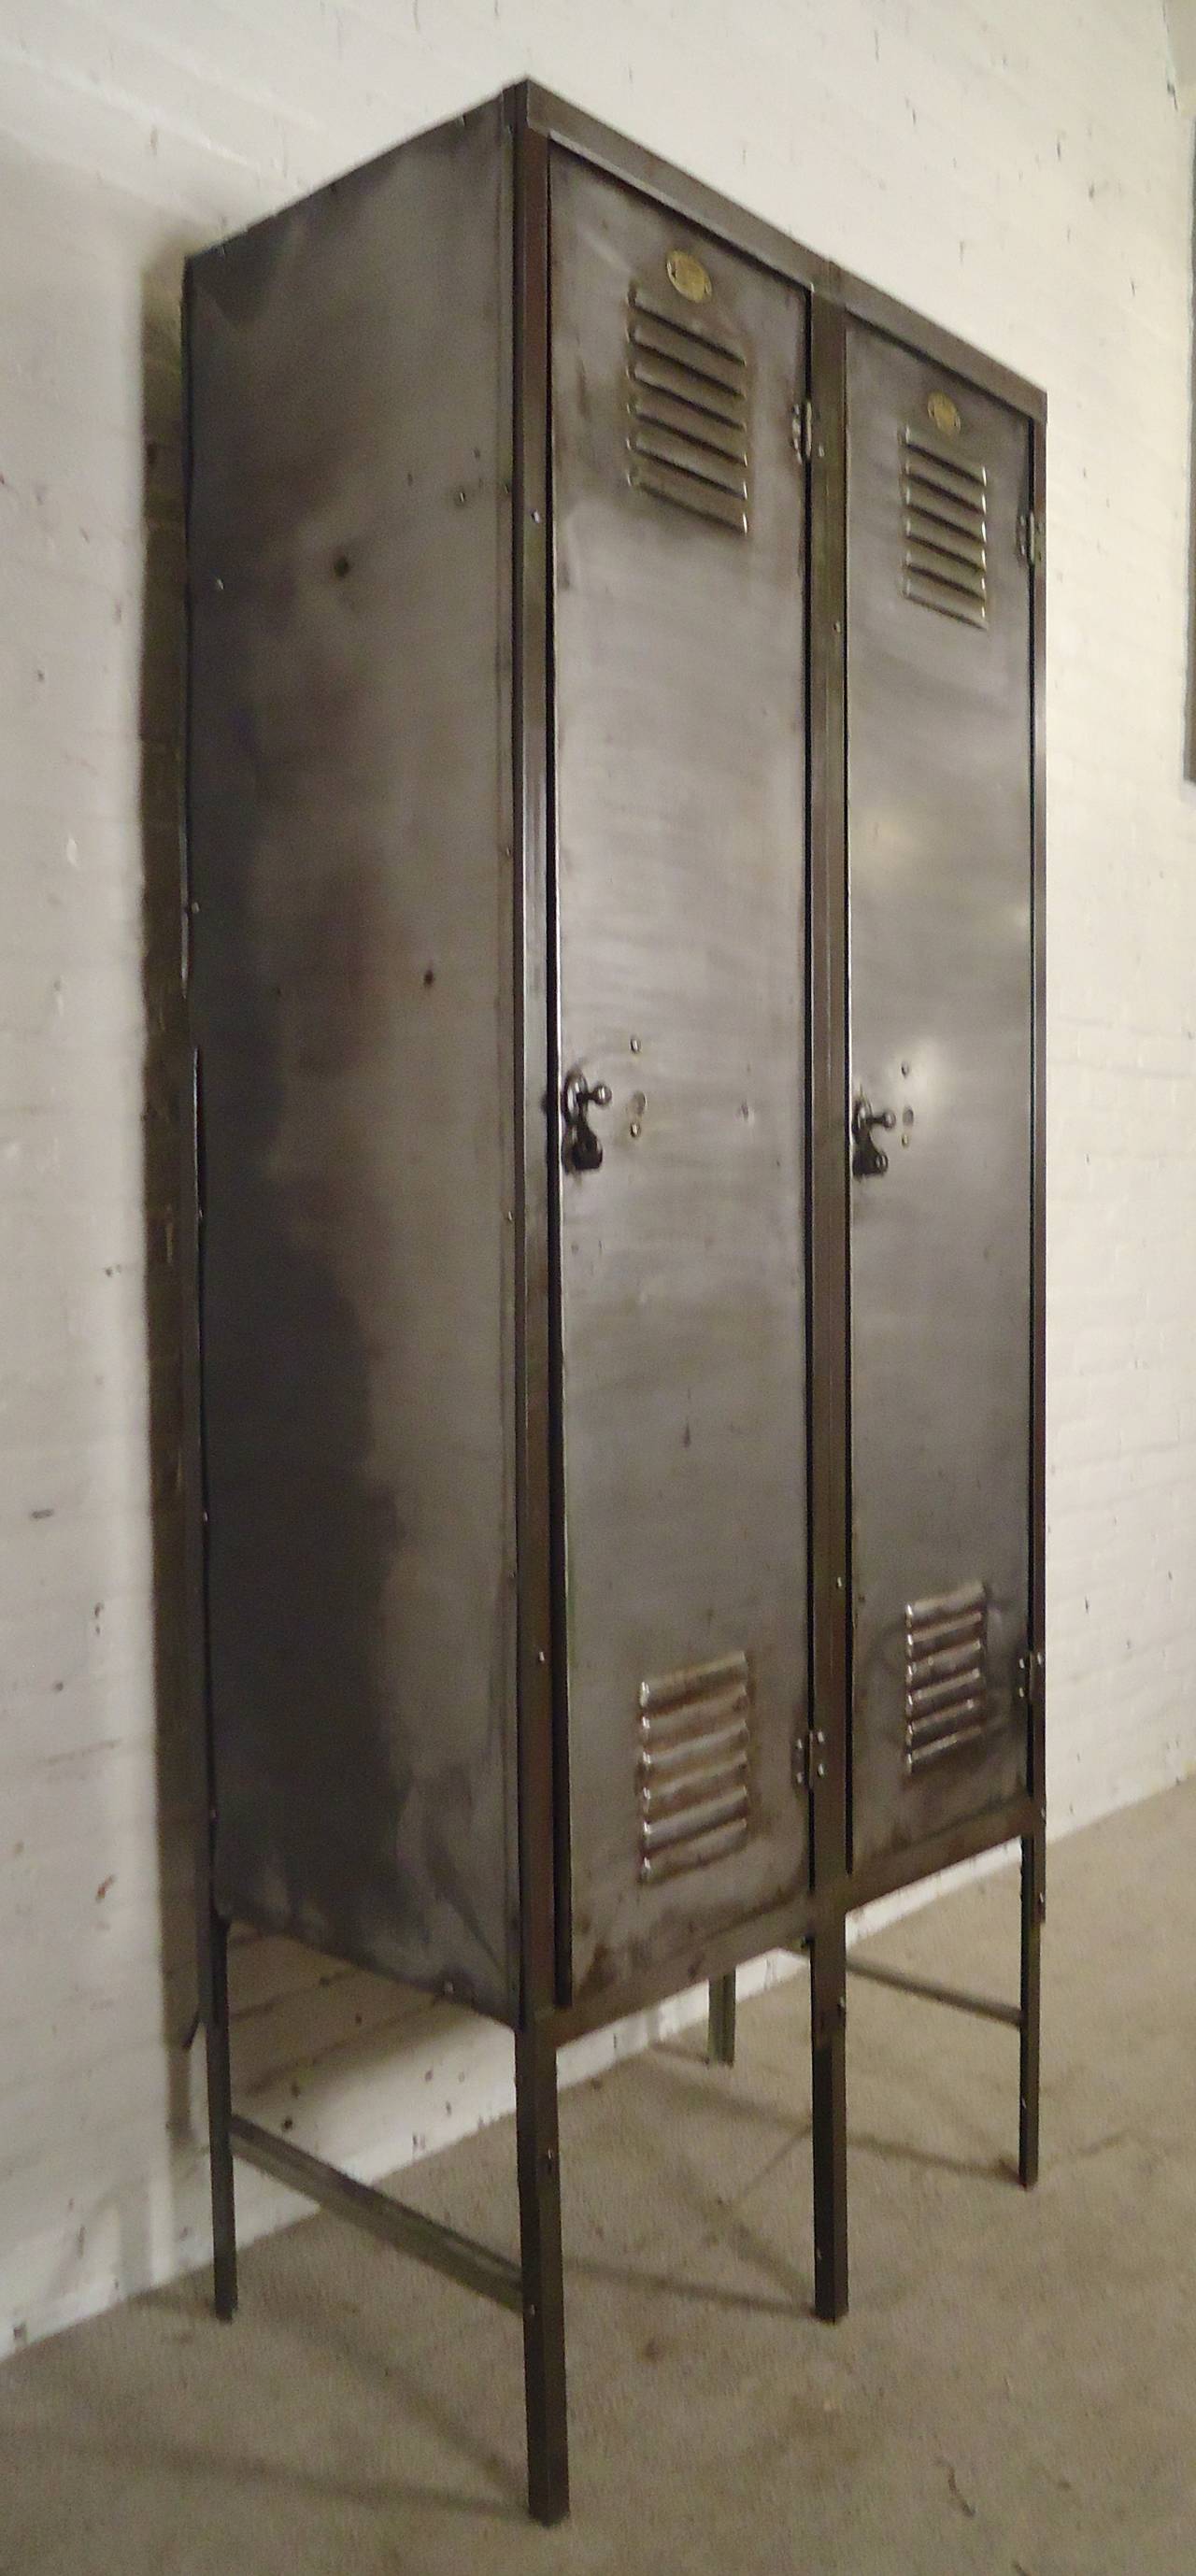 Vintage double locker unit restored, featuring large and deep storage space, original brass tags, set on metal legs. Makes for an attractive cabinet in a modern home or office.

(Please confirm item location - NY or NJ - with dealer)